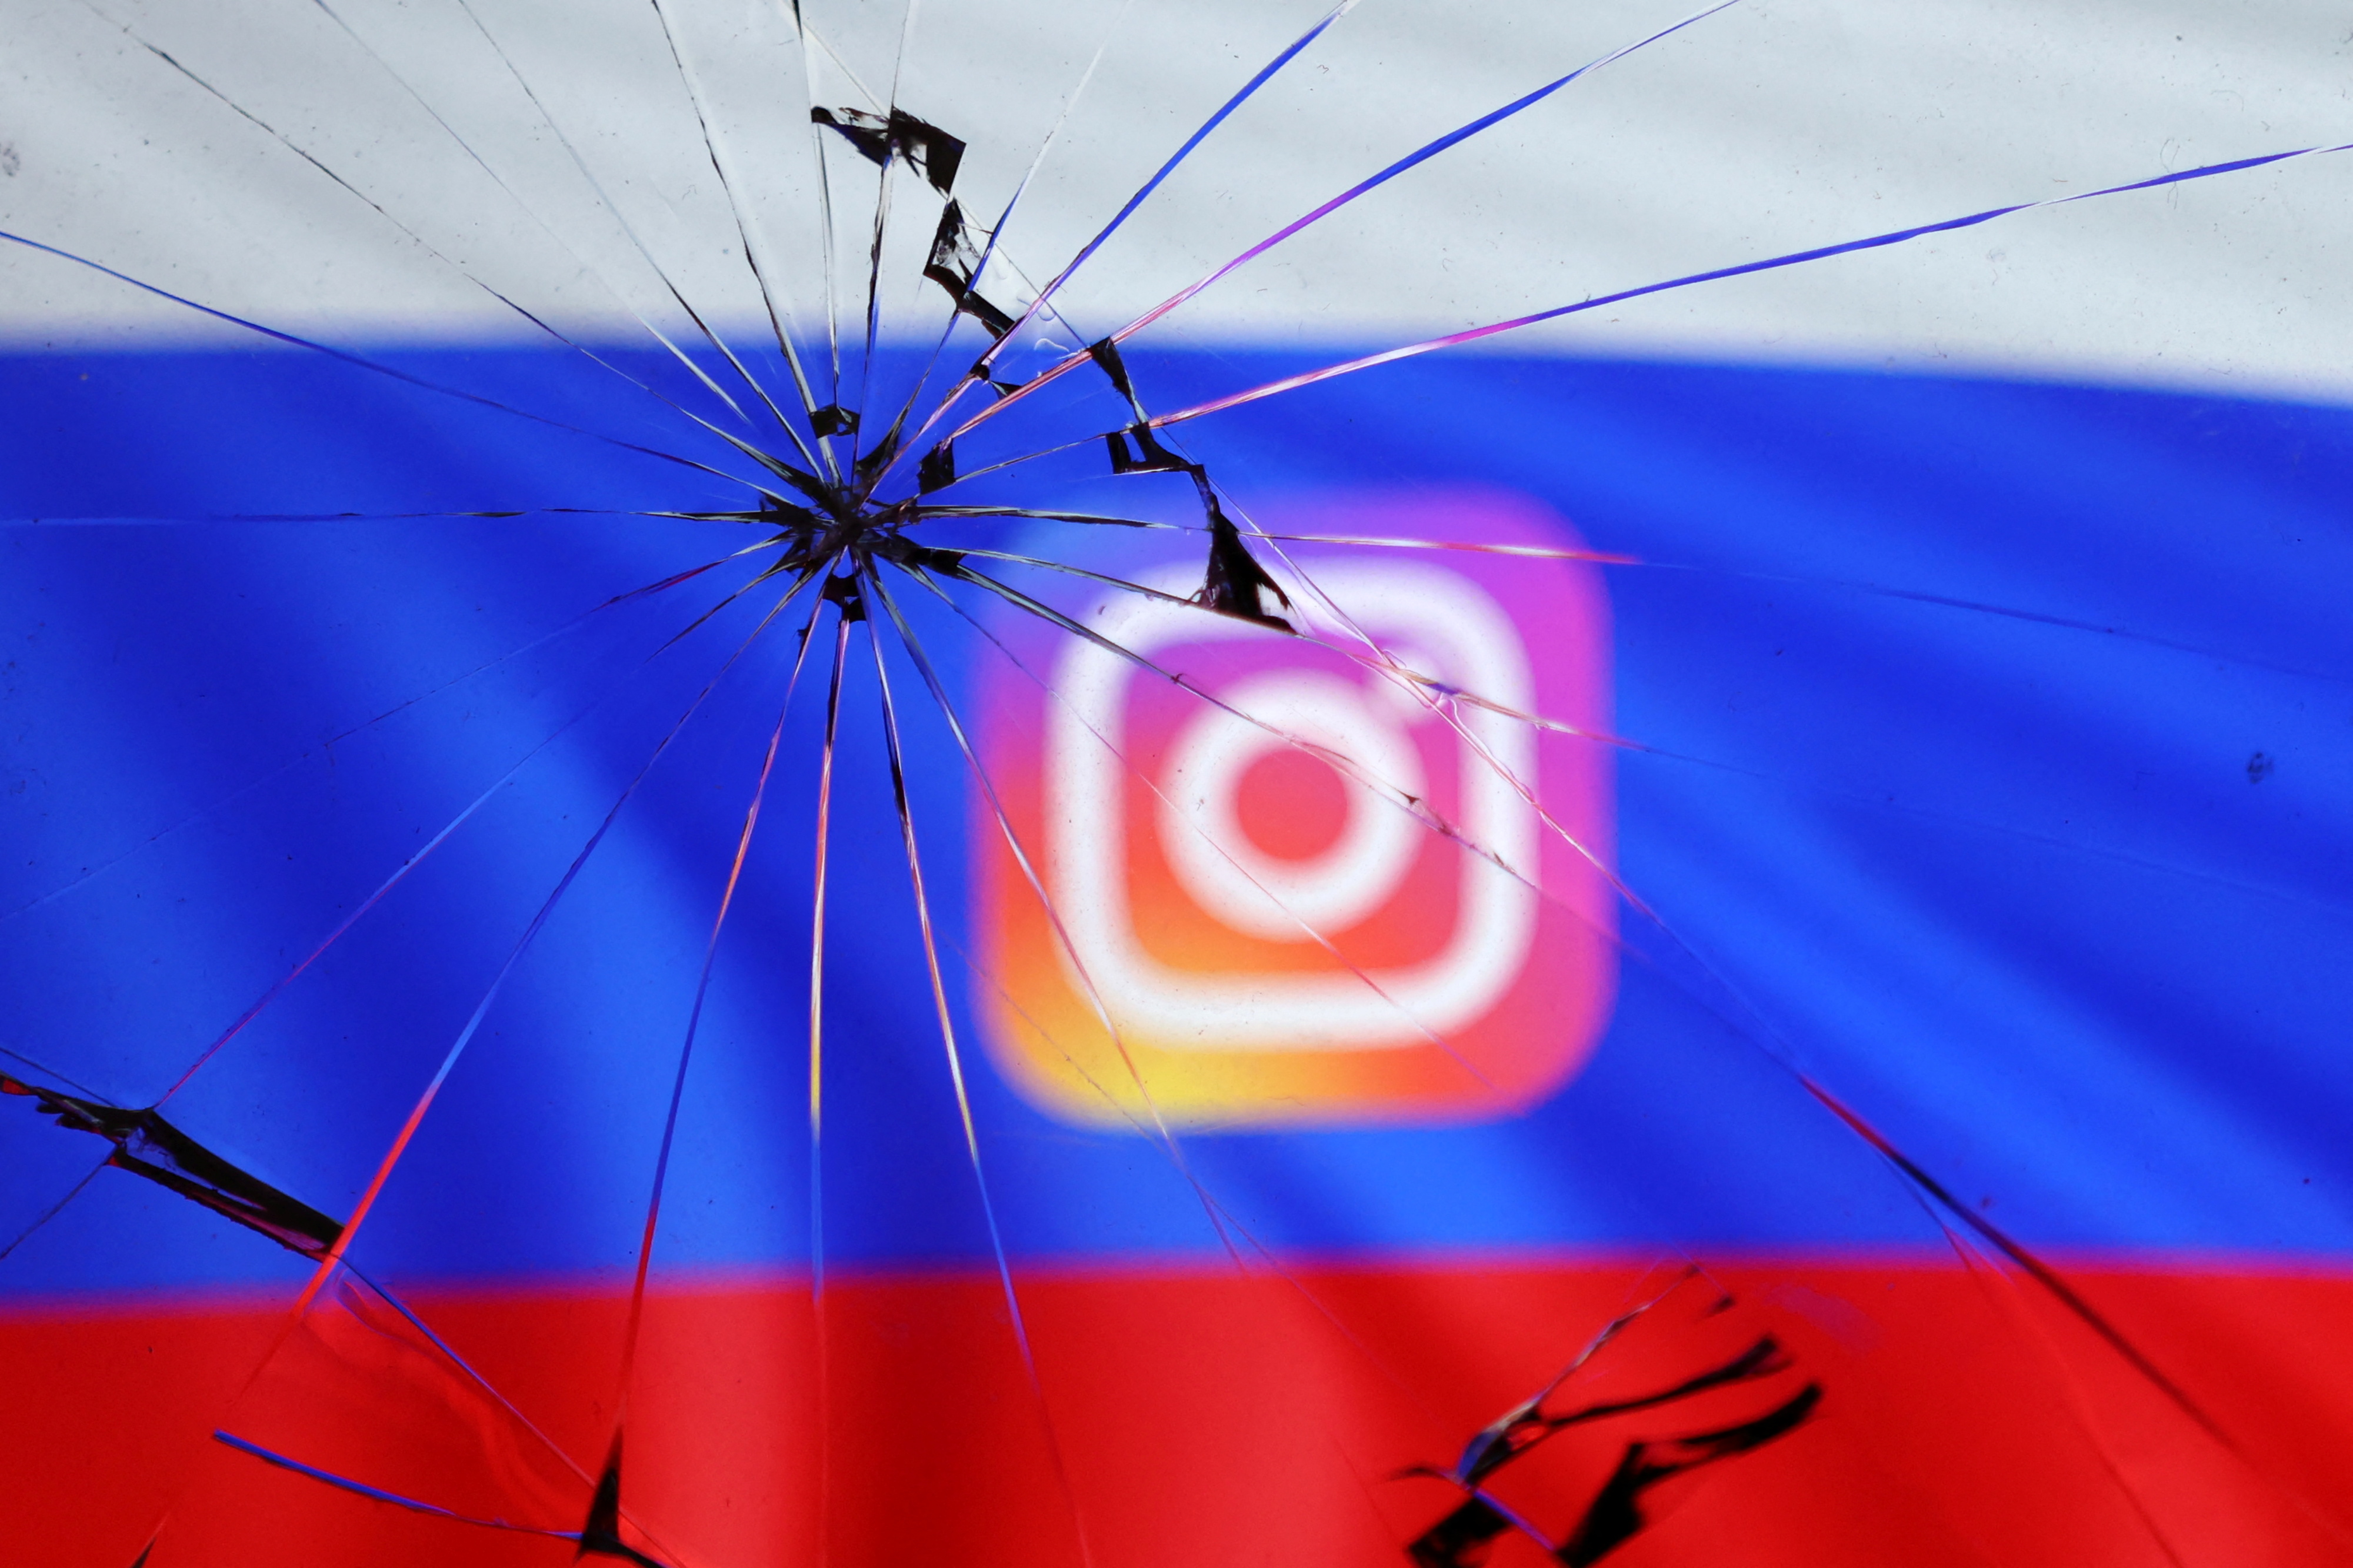 Illustration shows Russian flag and Instagram logo